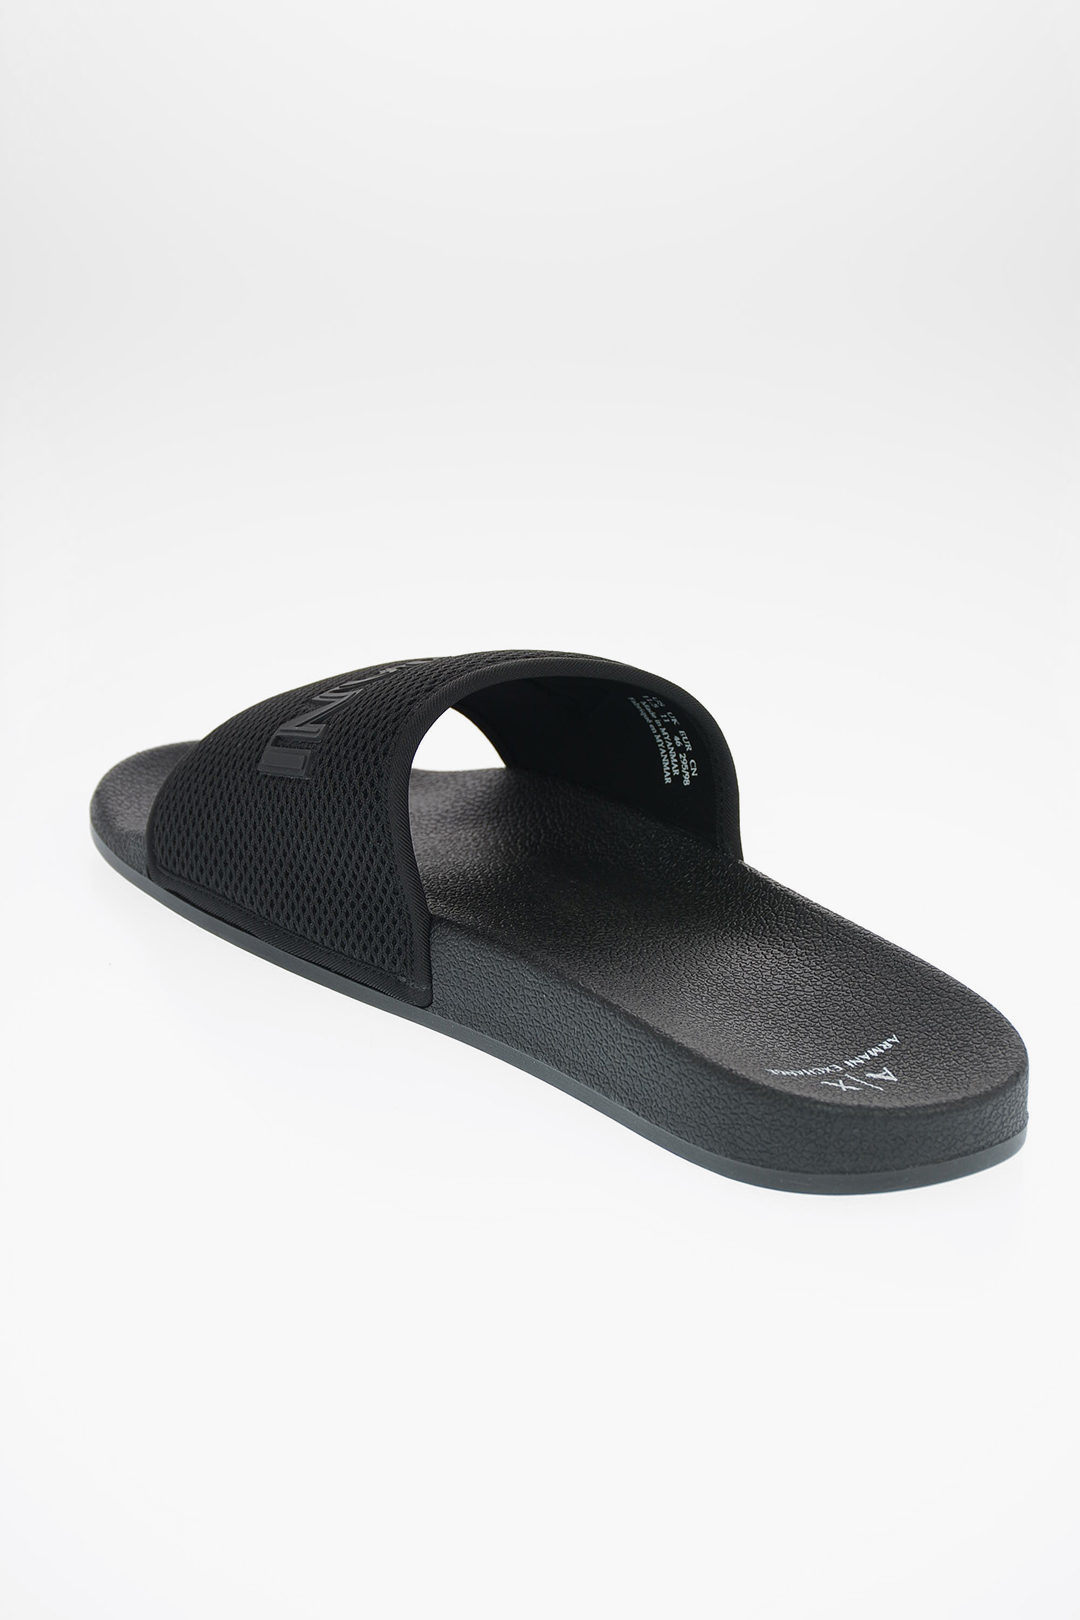 Armani ARMANI EXCHANGE Fabric and Rubber Slipper men - Glamood Outlet